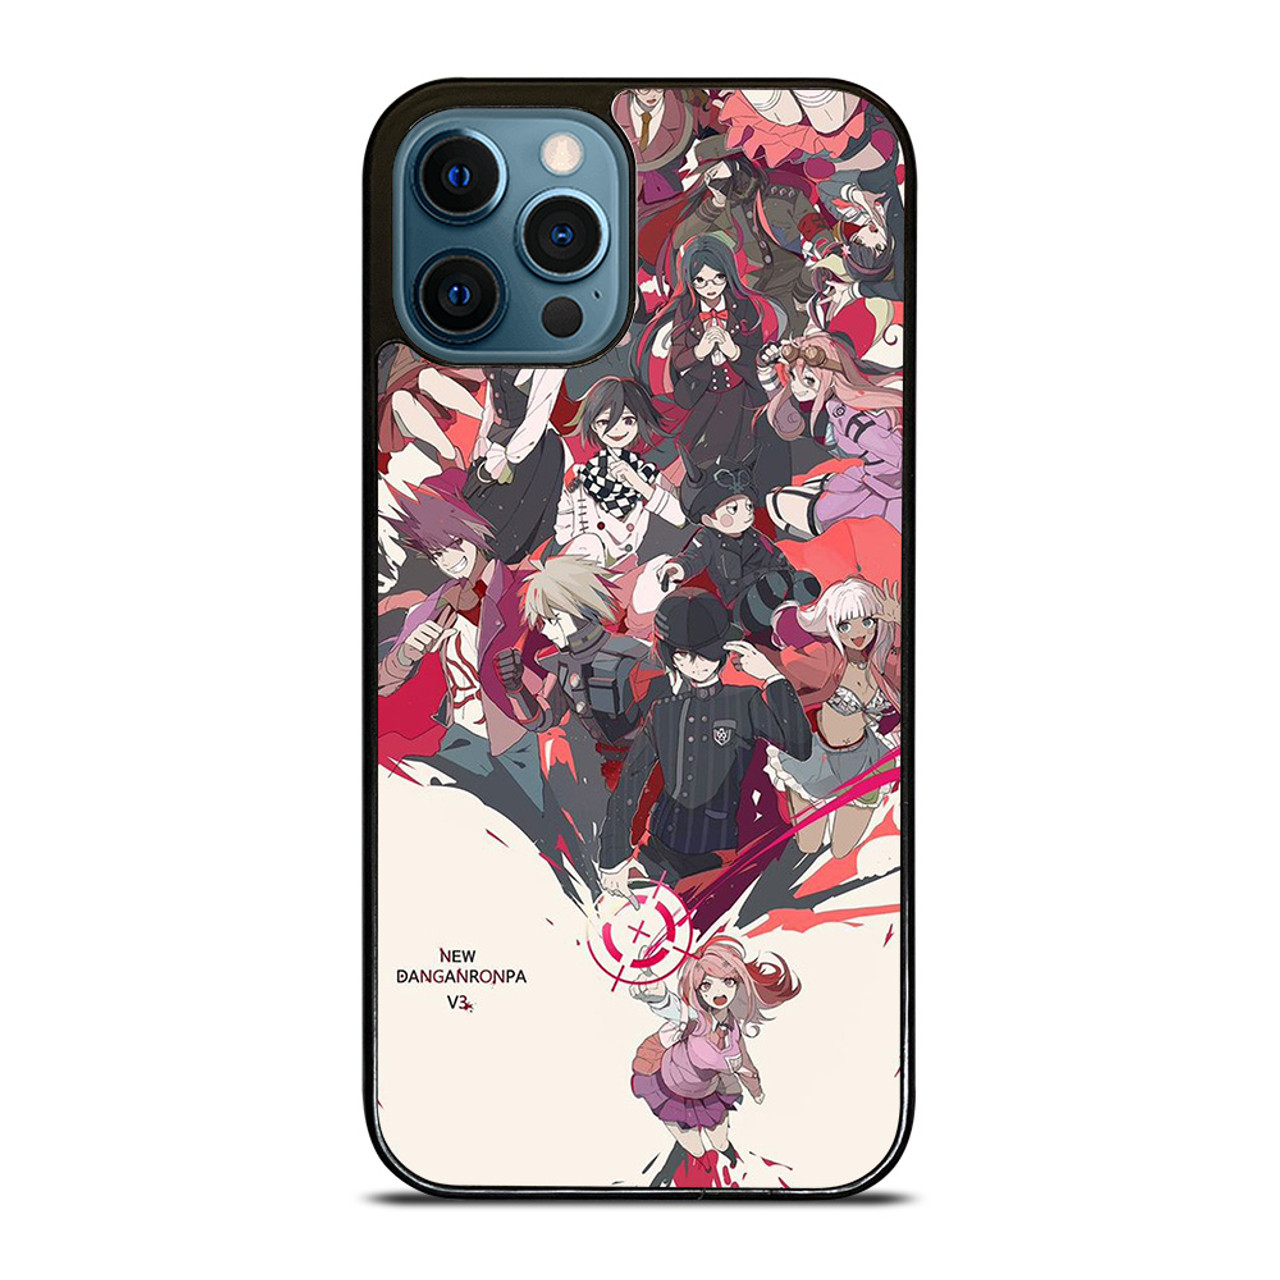 GetUSCart- Anime Design Case for iPhone 12 and 12 Pro,Soft TPU Bumper and  Hard PC Back Ultrathin Cover Cases for iPhone 12/12Pro 6.1